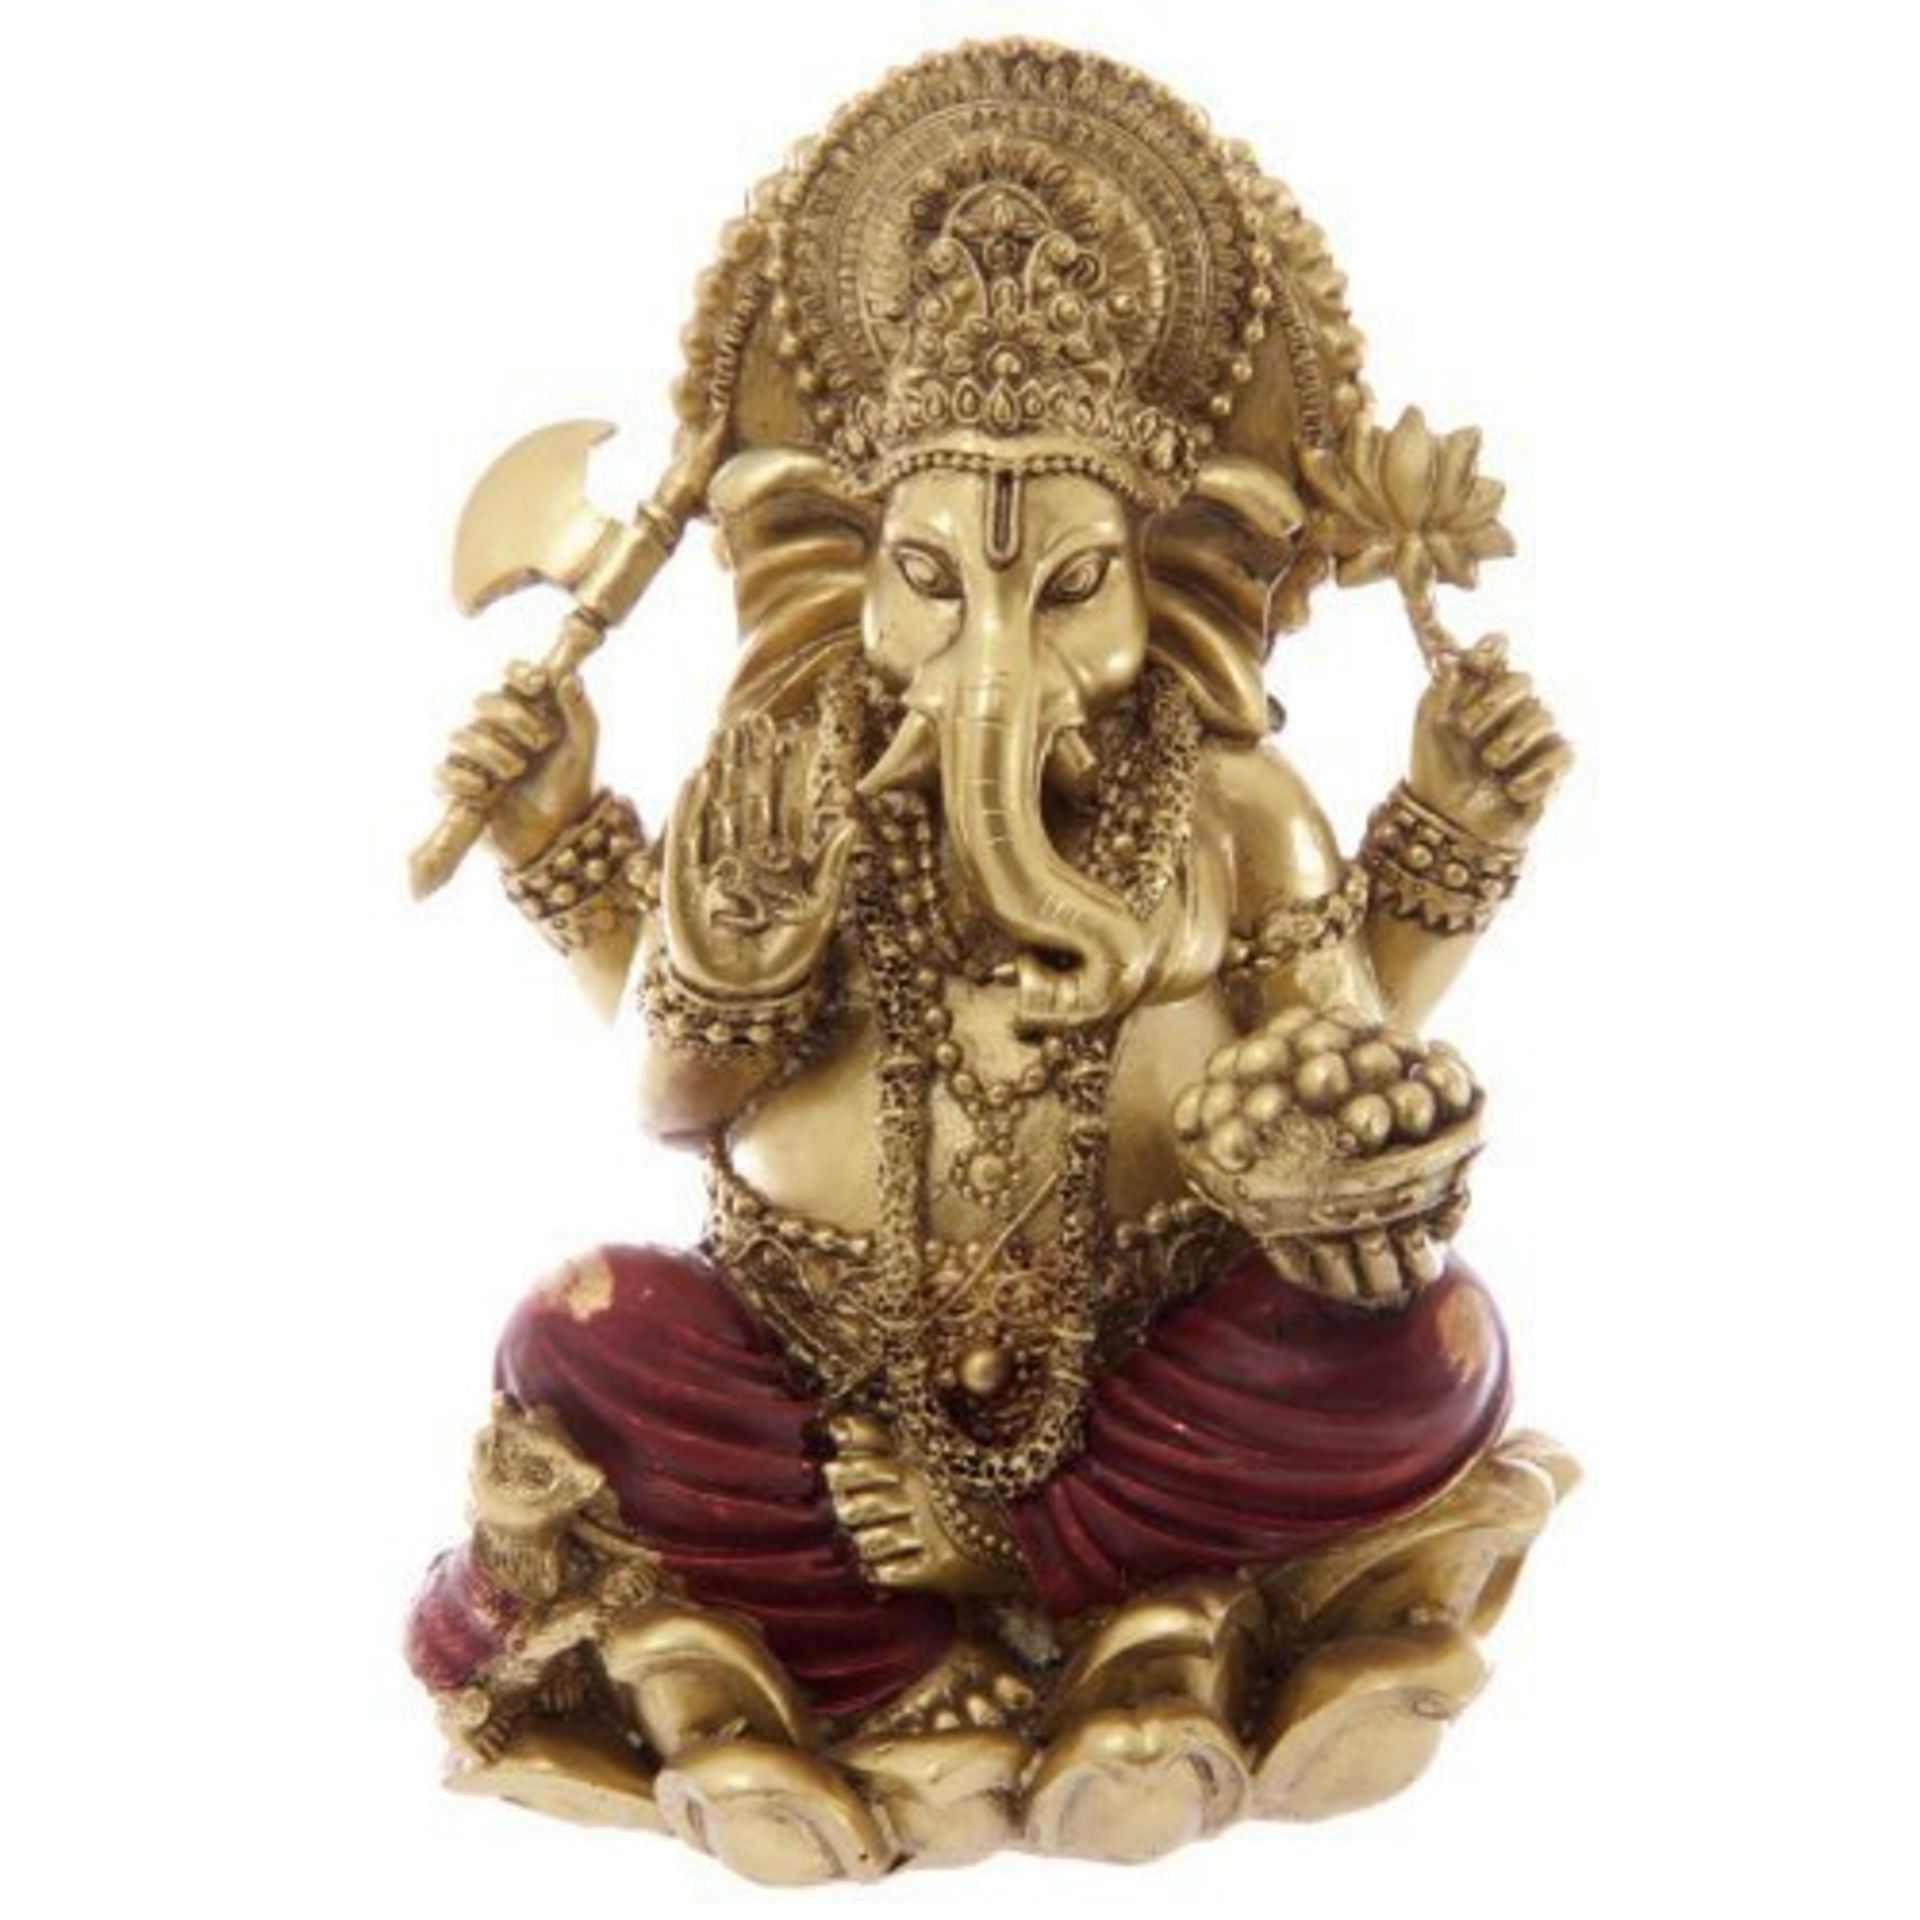 Gold and Red Ganesh Statue 16cm